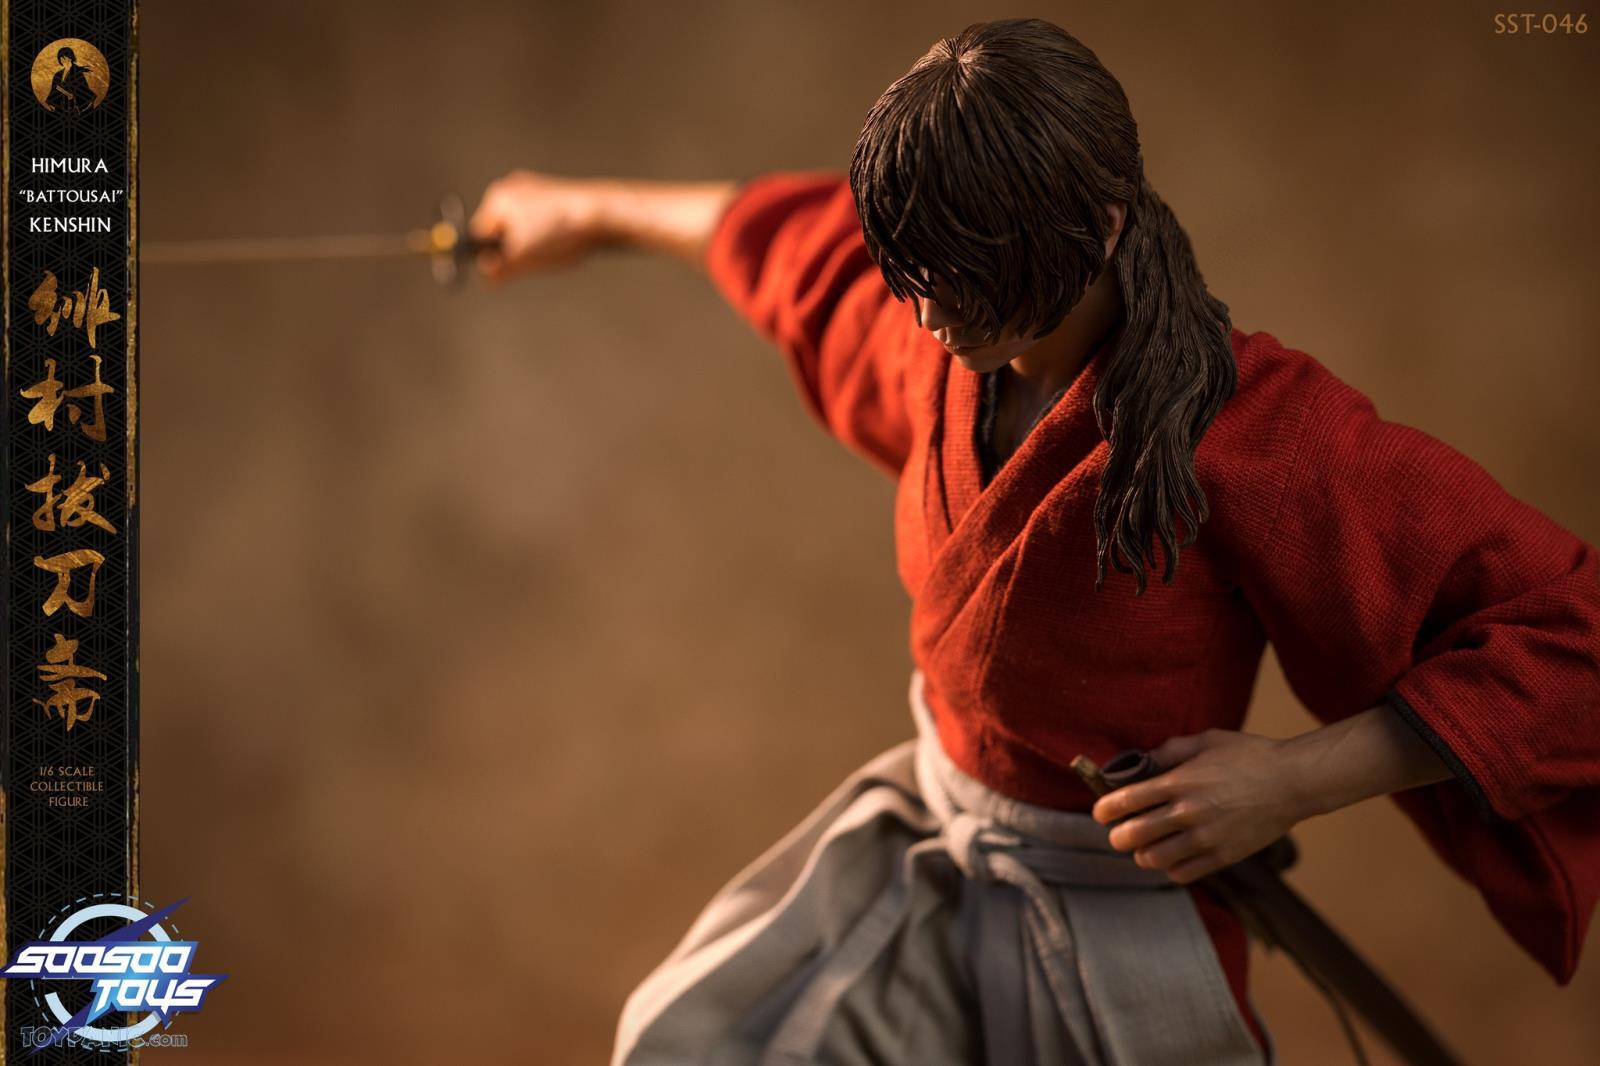 kenshin - NEW PRODUCT: 1/6 scale Rurouni Kenshin Collectible Figure from SooSooToys 712202251229PM_9557183